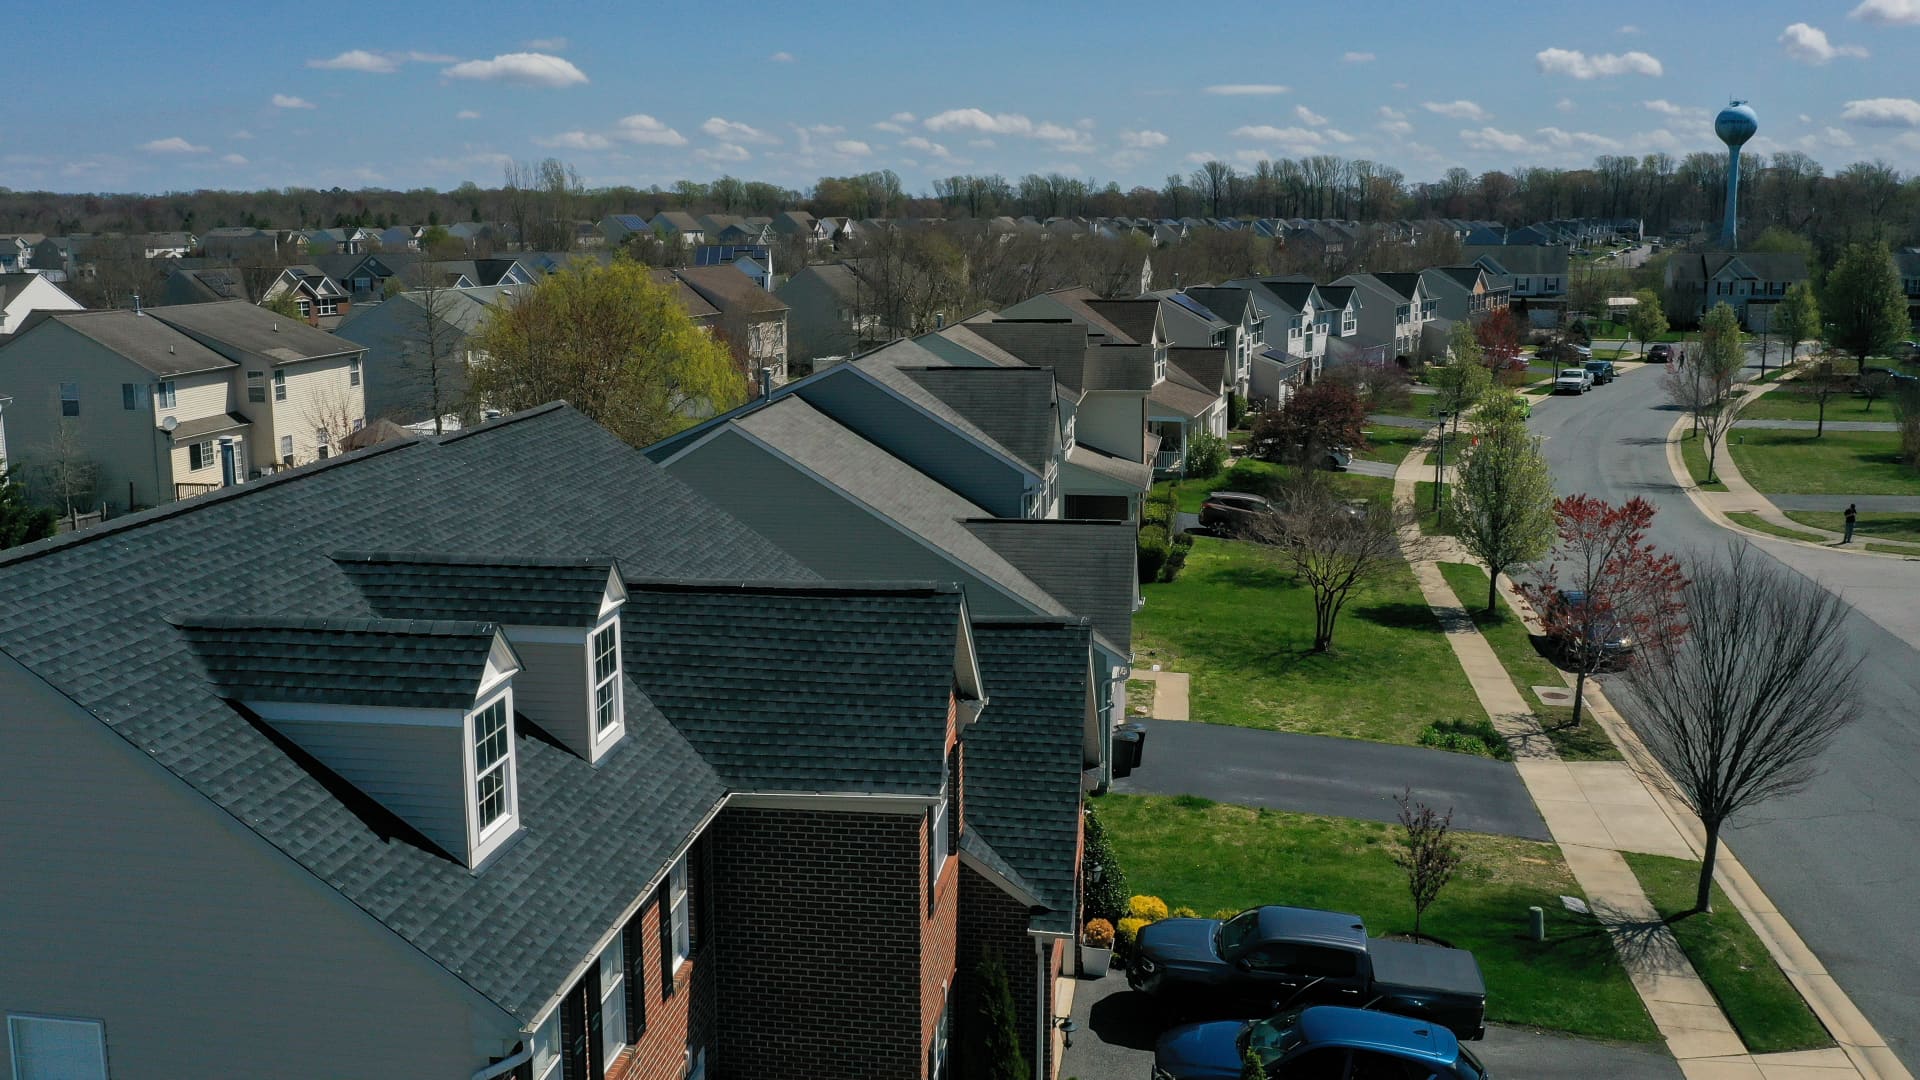 Homes in Centreville, Maryland, US, on Tuesday, April 4, 2023. 